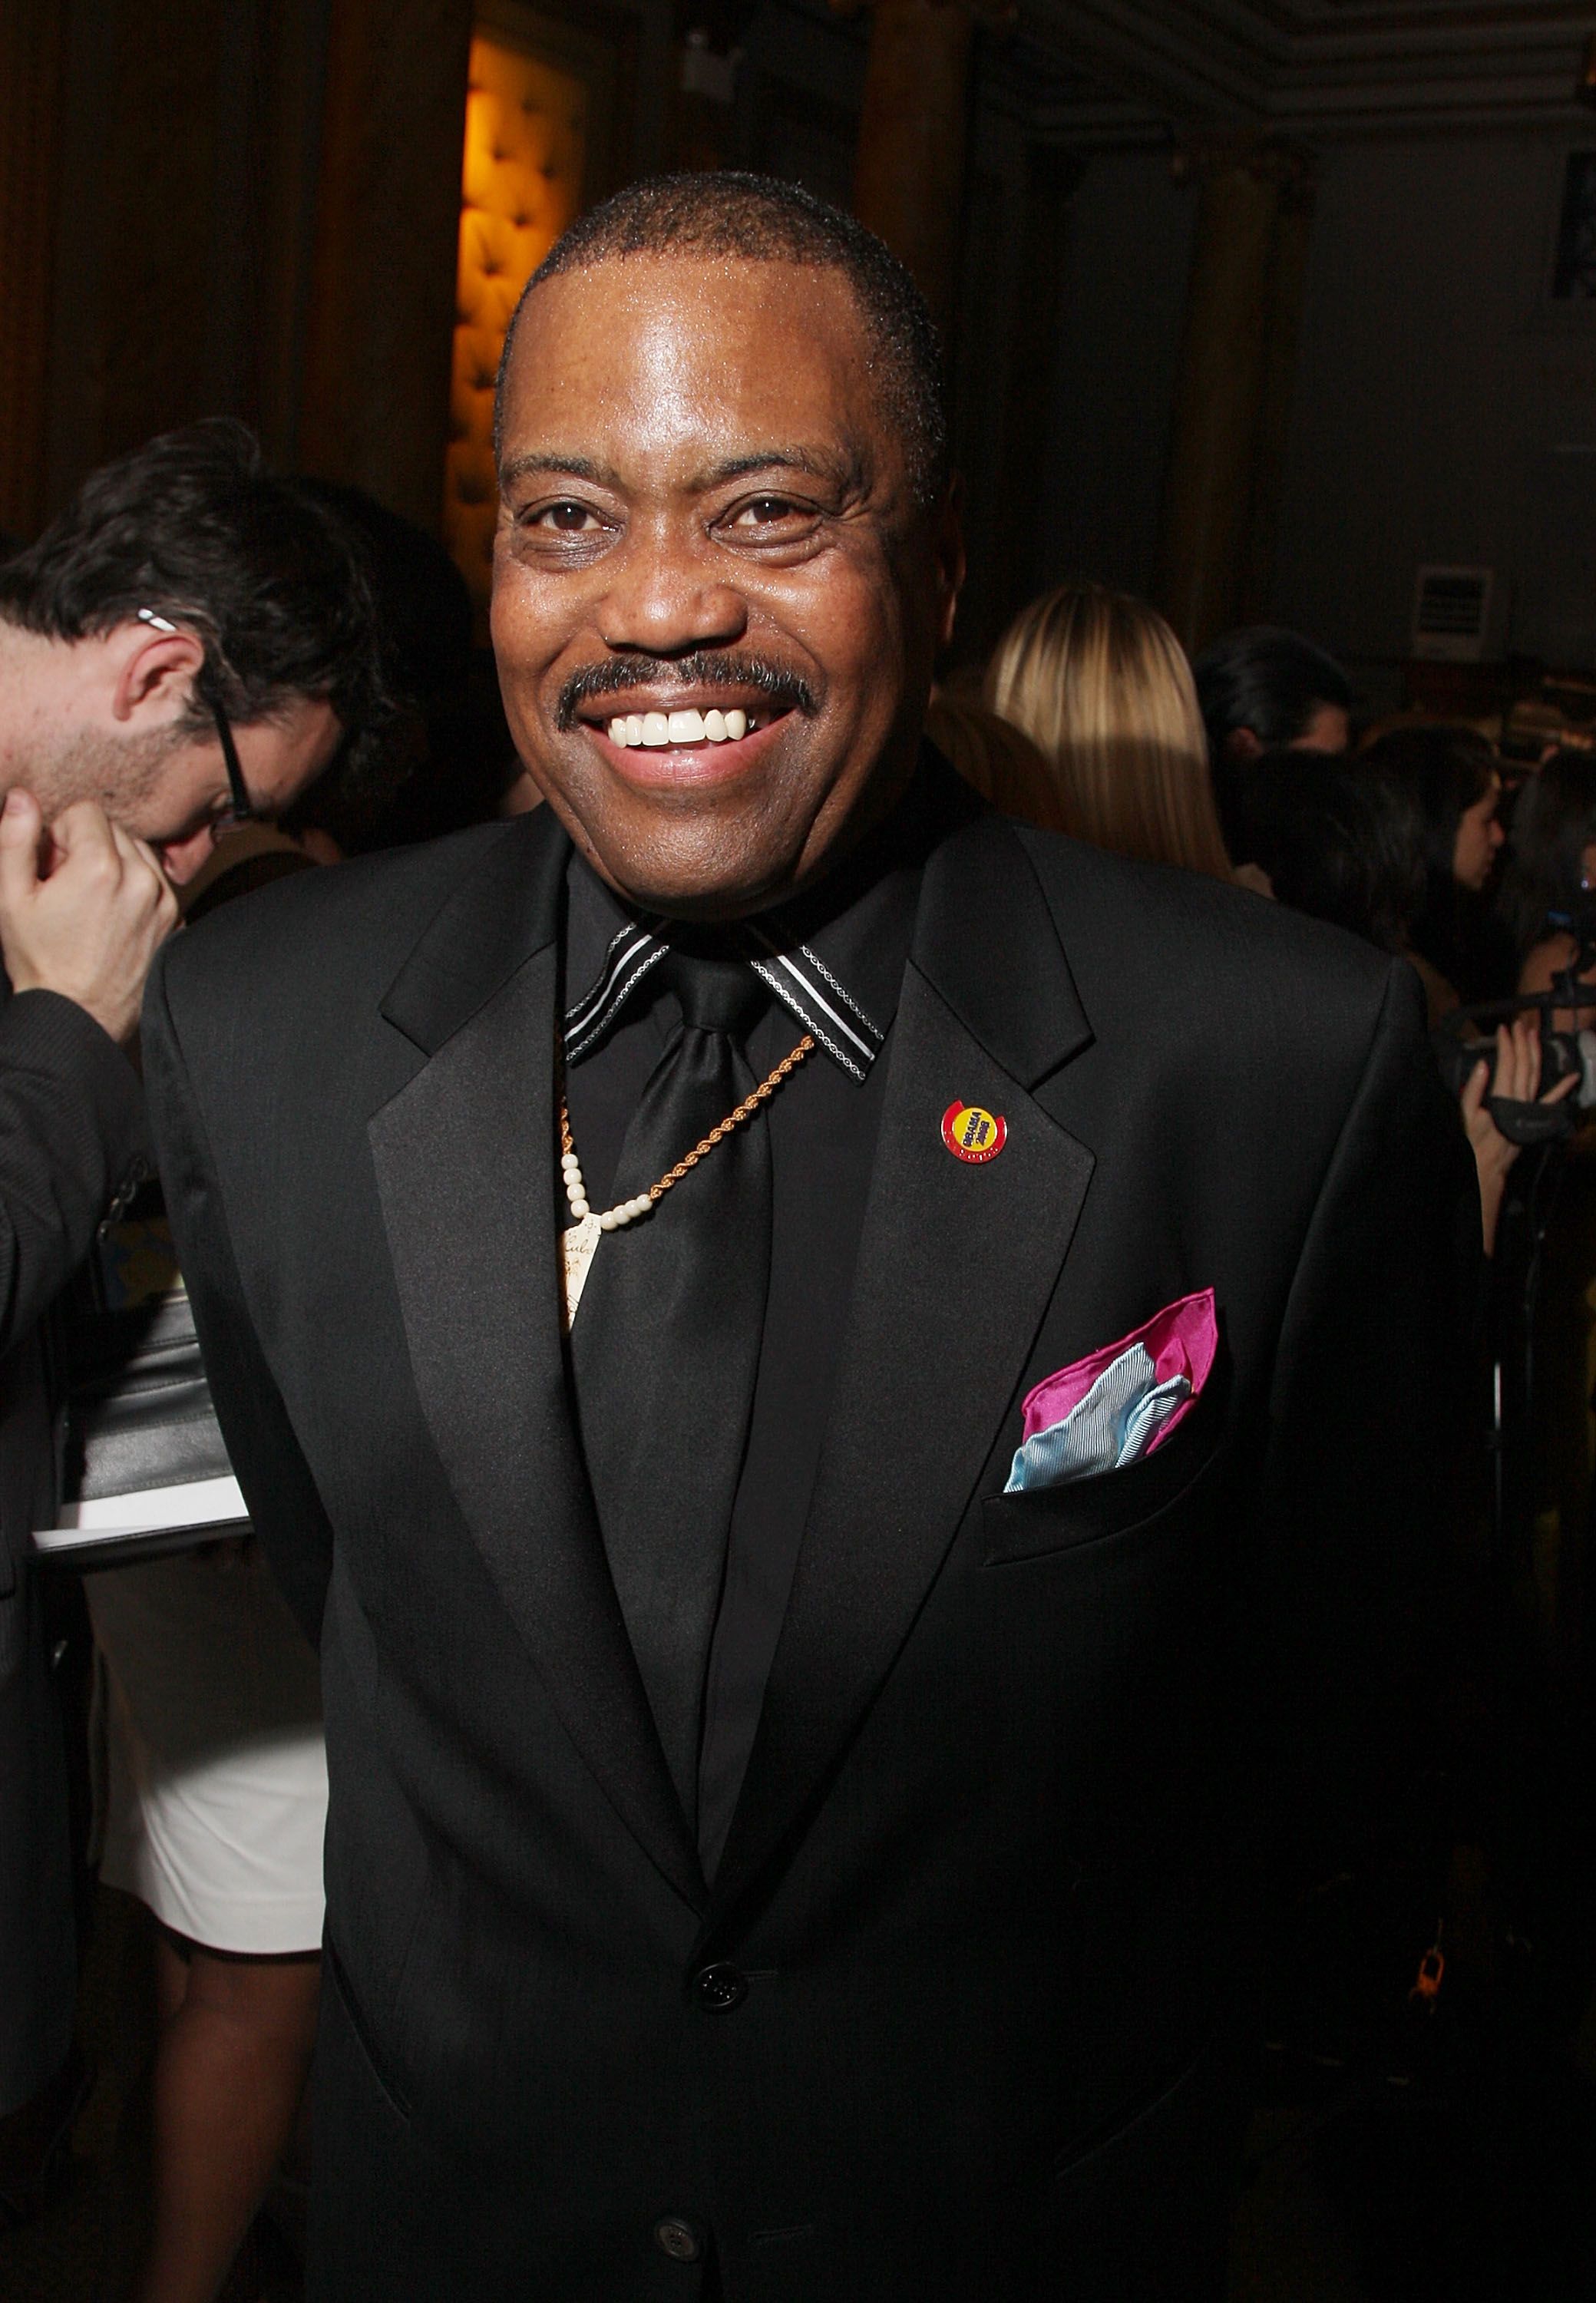 Cuba Gooding Sr. during the "Chocolat au Vin" benefit for St. Jude's Children's Research Hospital at Capitale on May 28, 2009 in New York City. | Source: Getty Images